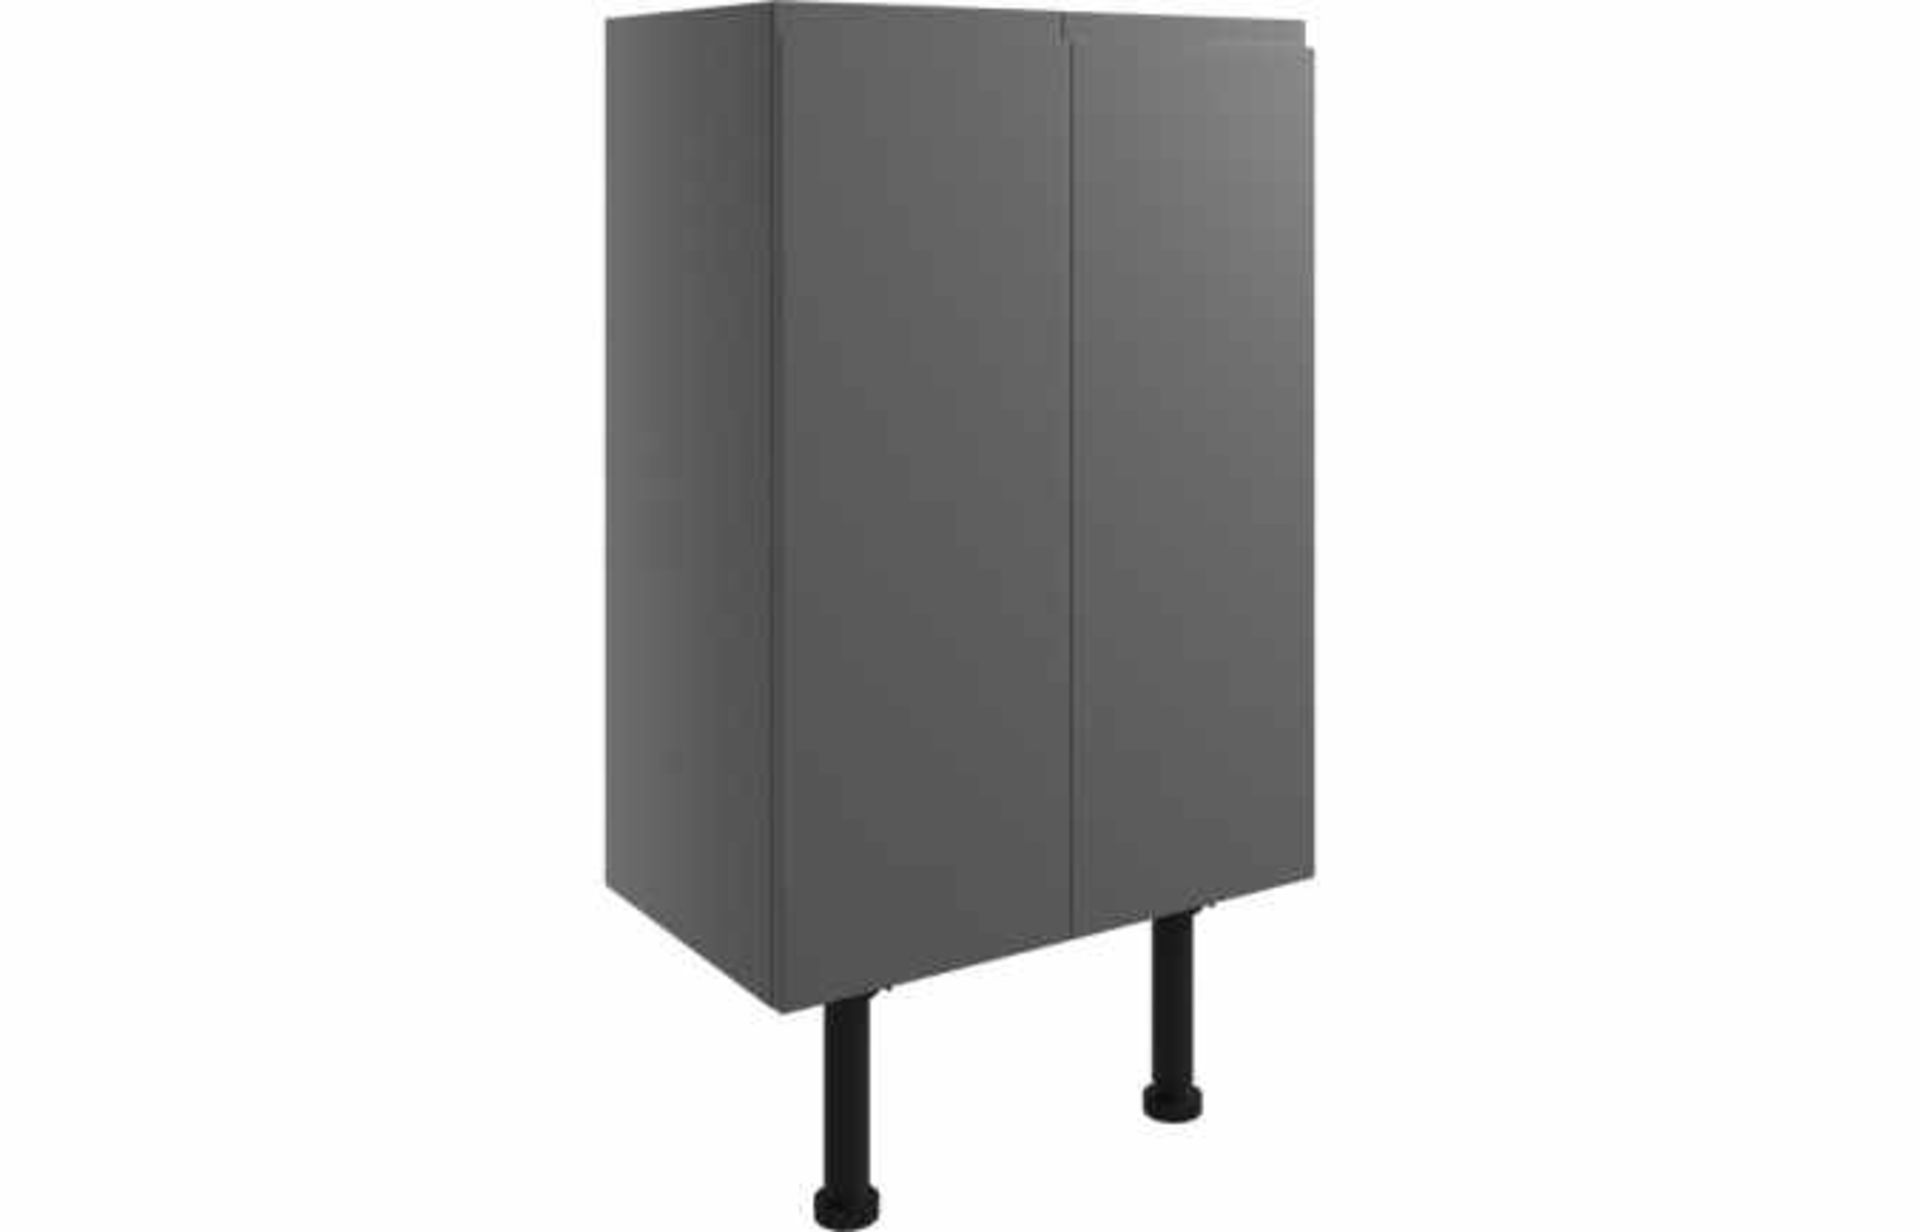 NEW (L102) 600mm - Valesso 2 Door Base Unit - Onyx Grey Gloss. RRP £385.00. Durable 18mm cabin... - Image 2 of 2